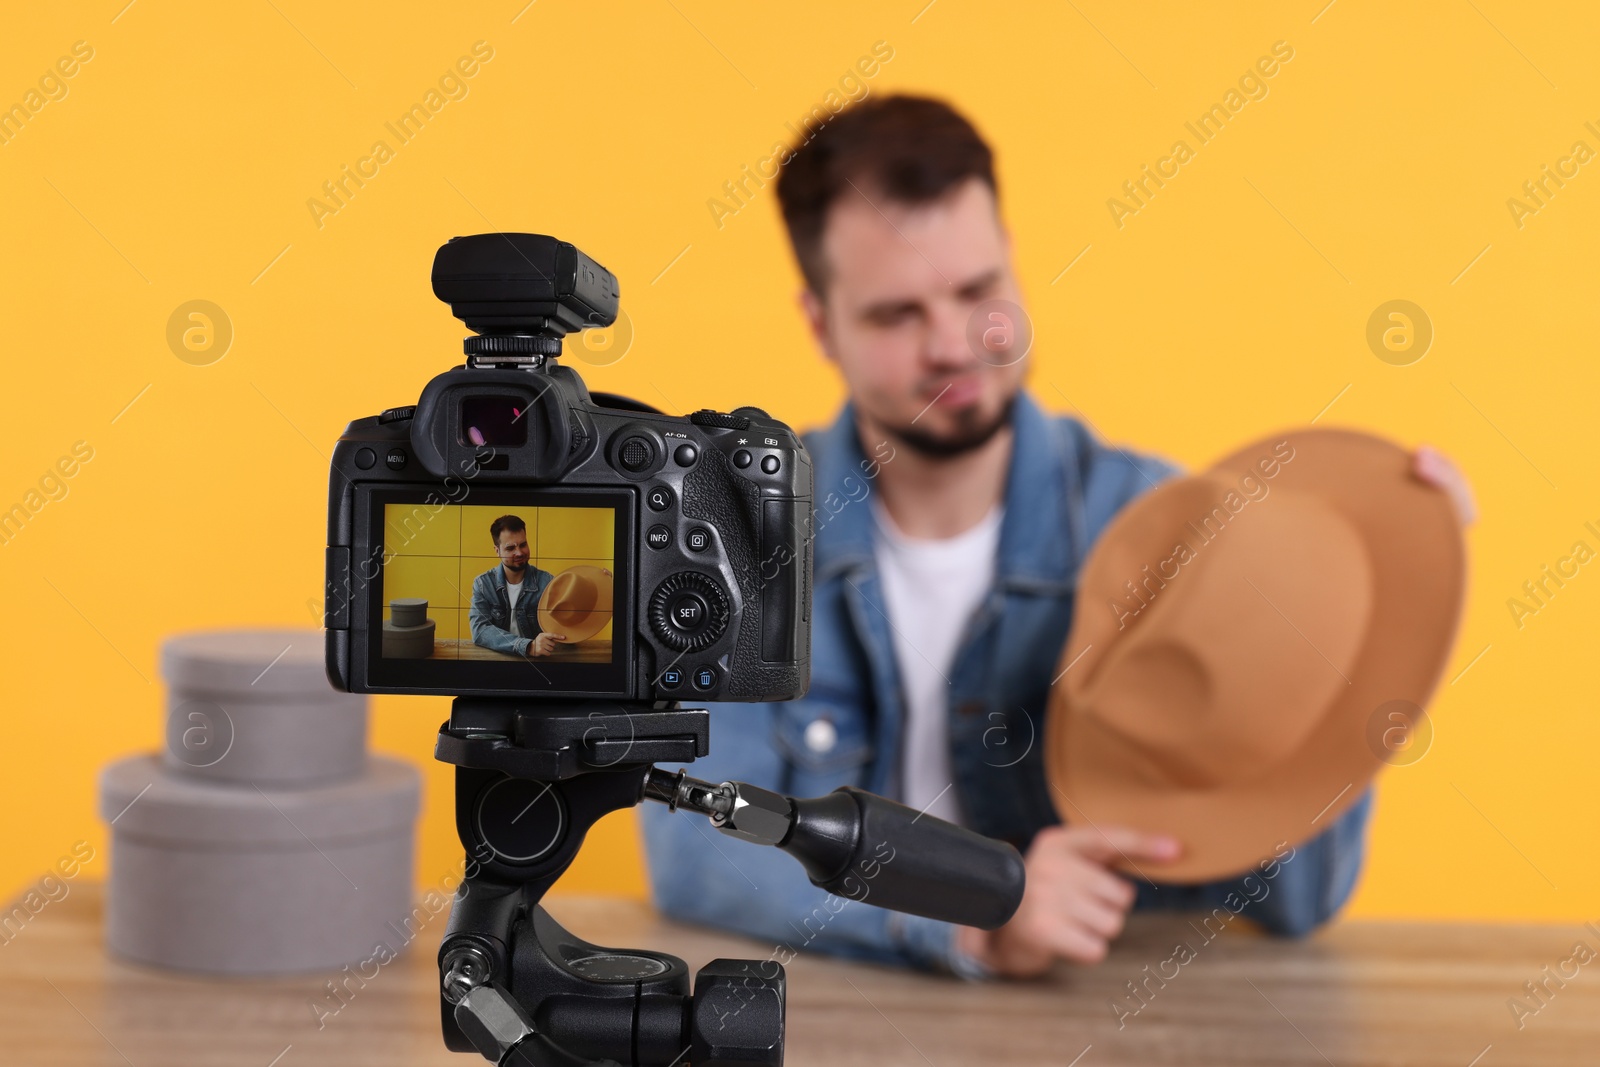 Photo of Fashion blogger showing hat while recording video at table against orange background, focus on camera